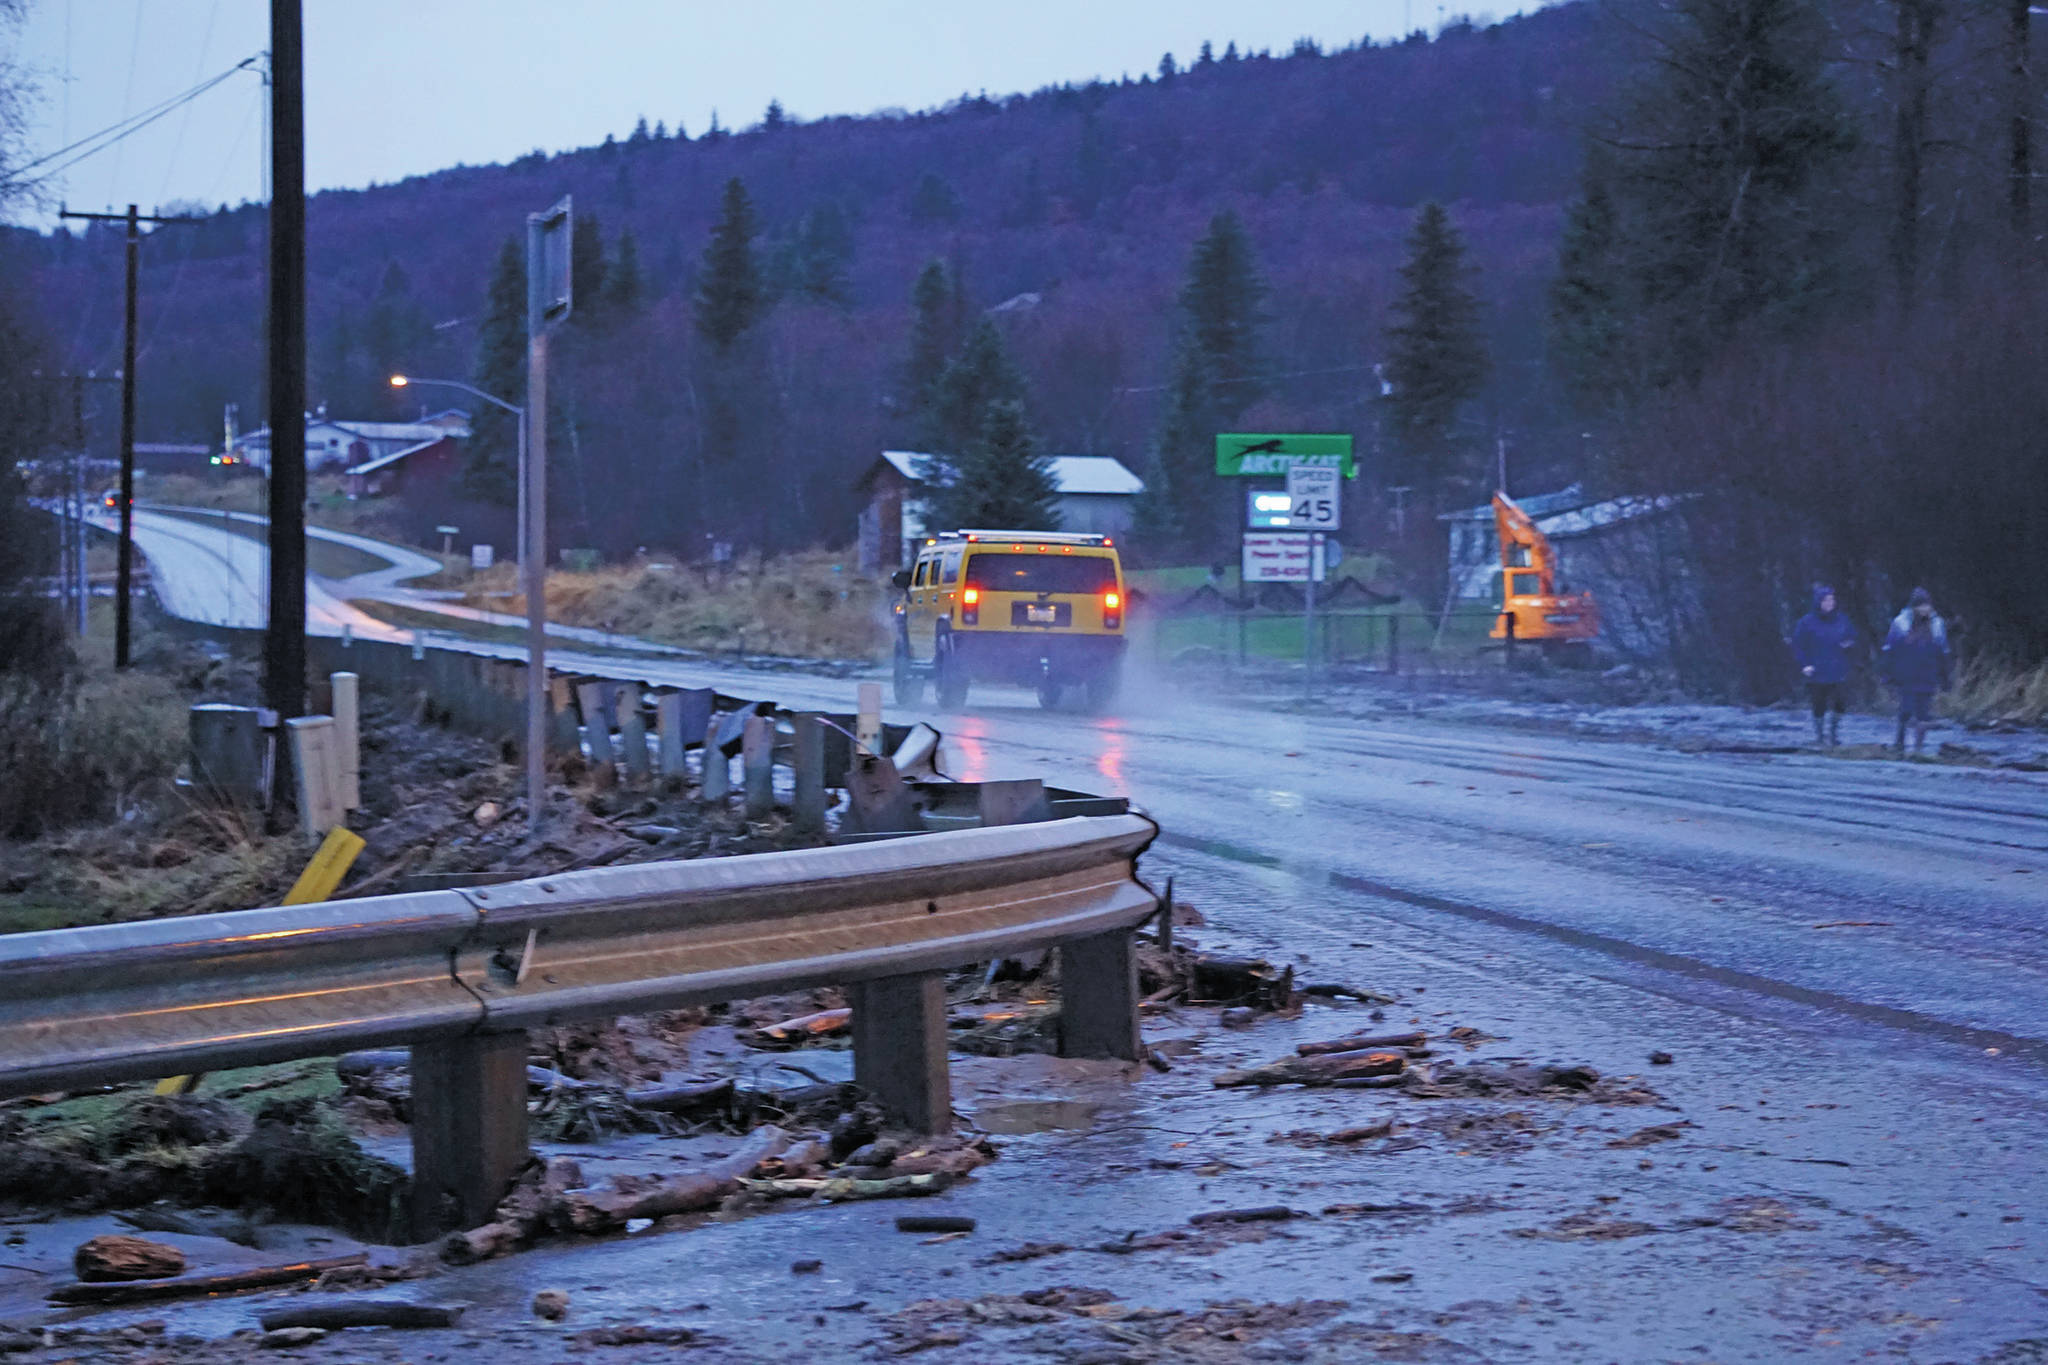 Mud and debris is washed up at Bear Creek near East End Road on Monday afternoon, Dec. 9, 2019, in Homer, Alaska. Bear Creek crosses East End Road near Bear Creek Drive and overflowed the creek banks. (Photo by Michael Armstrong/Homer News)